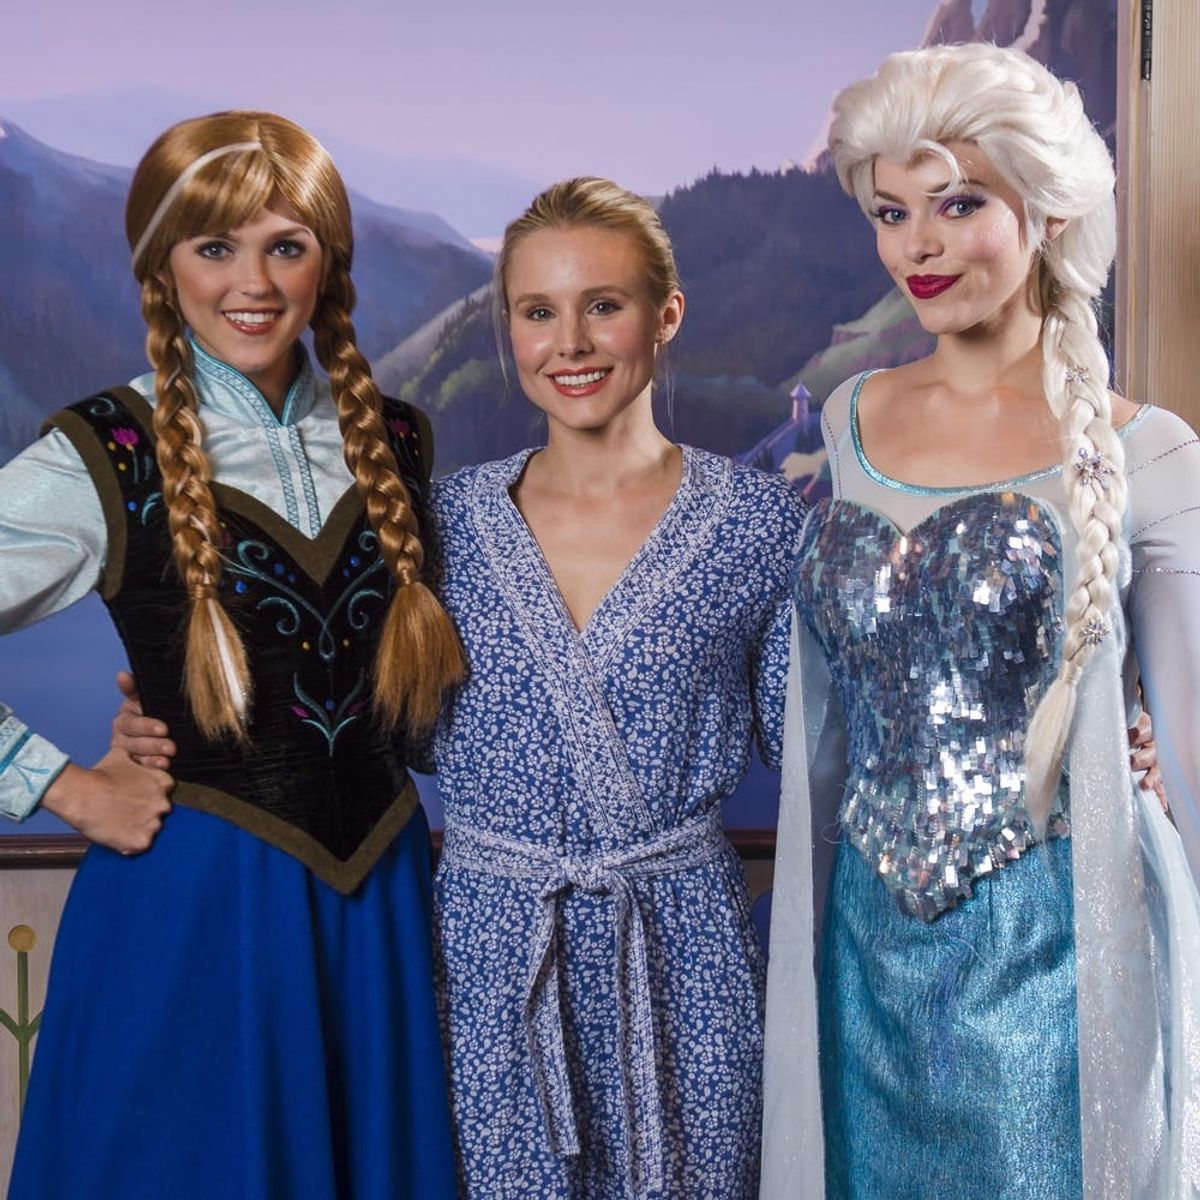 See Kristen Bell Dressed Up As Elsa from Disney’s “Frozen”… With a Twist